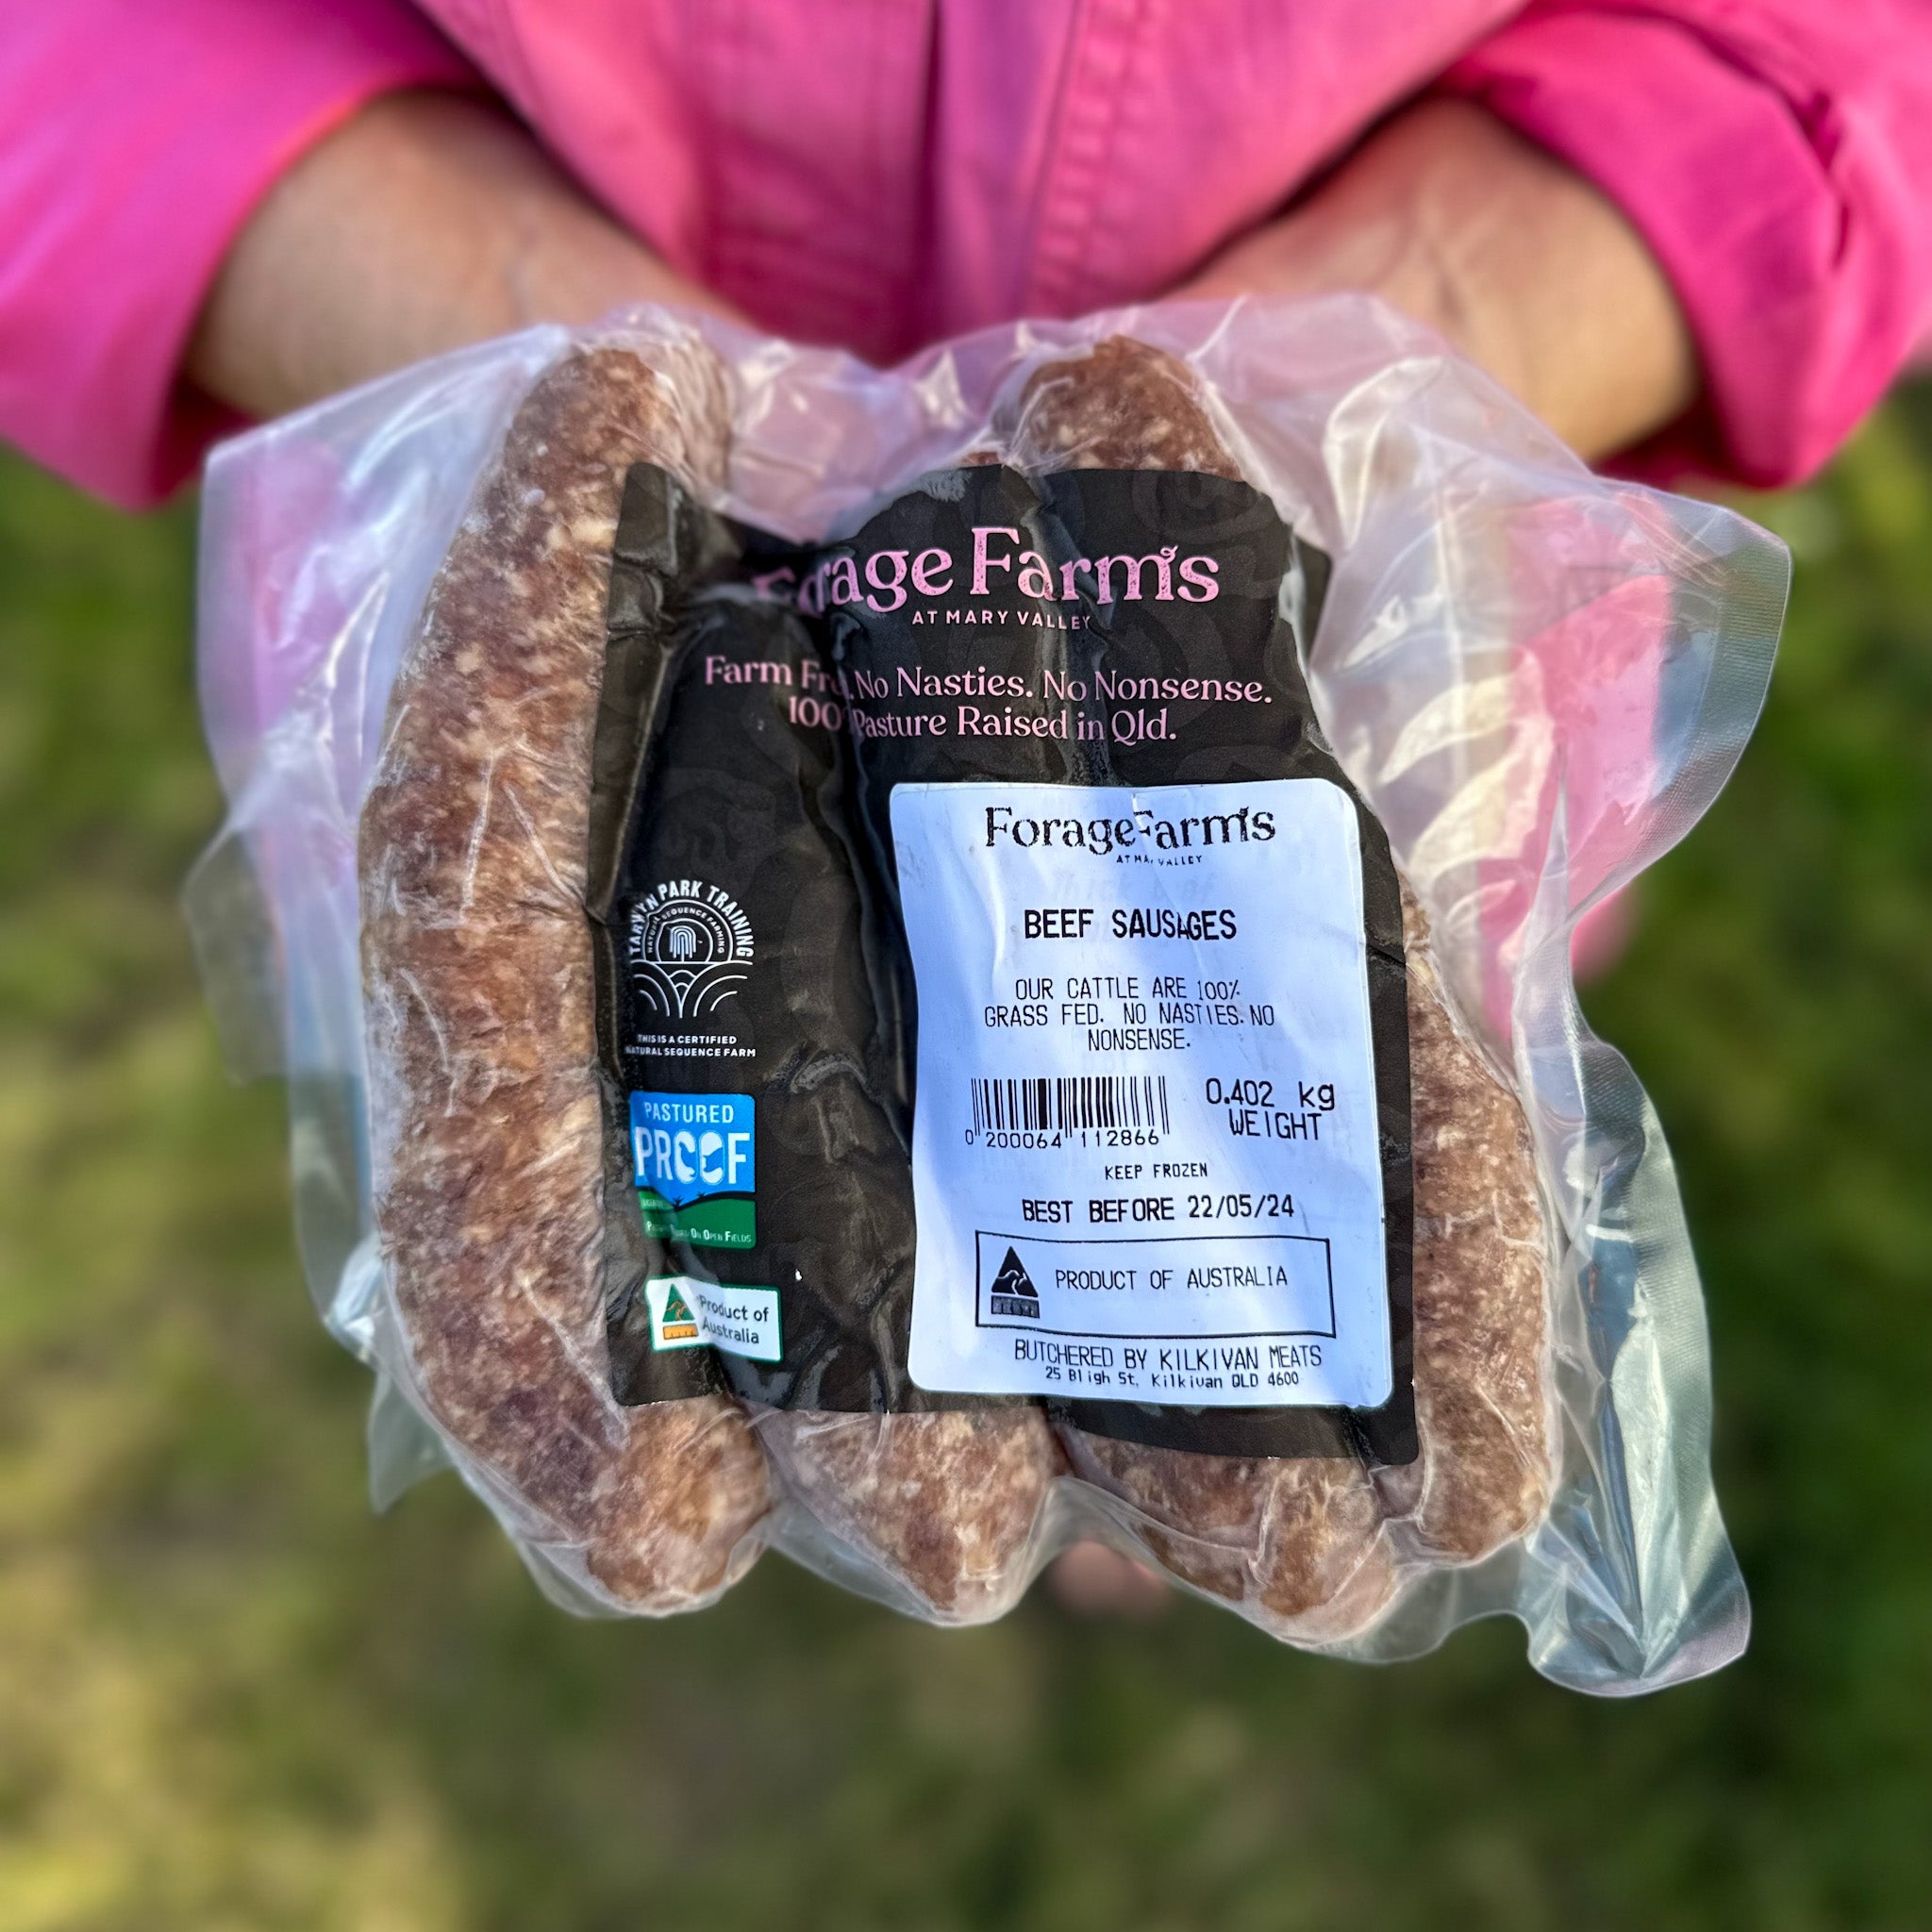 Forage Farms Grass Fed & Finished Beef Original Sausages